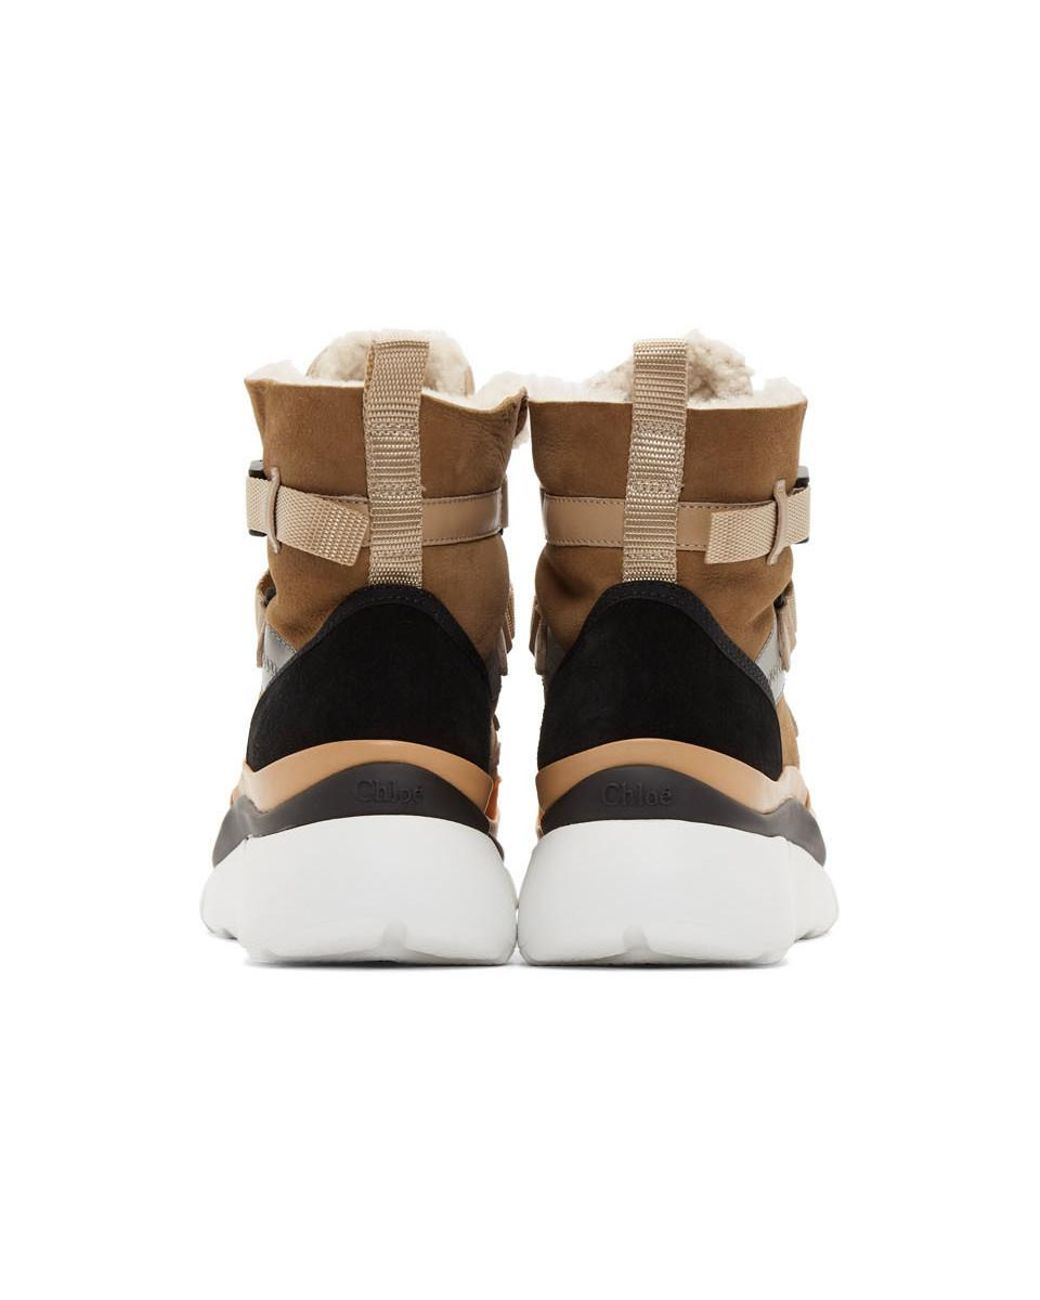 Chloé Leather Sonnie High-top Sneakers in Brown | Lyst